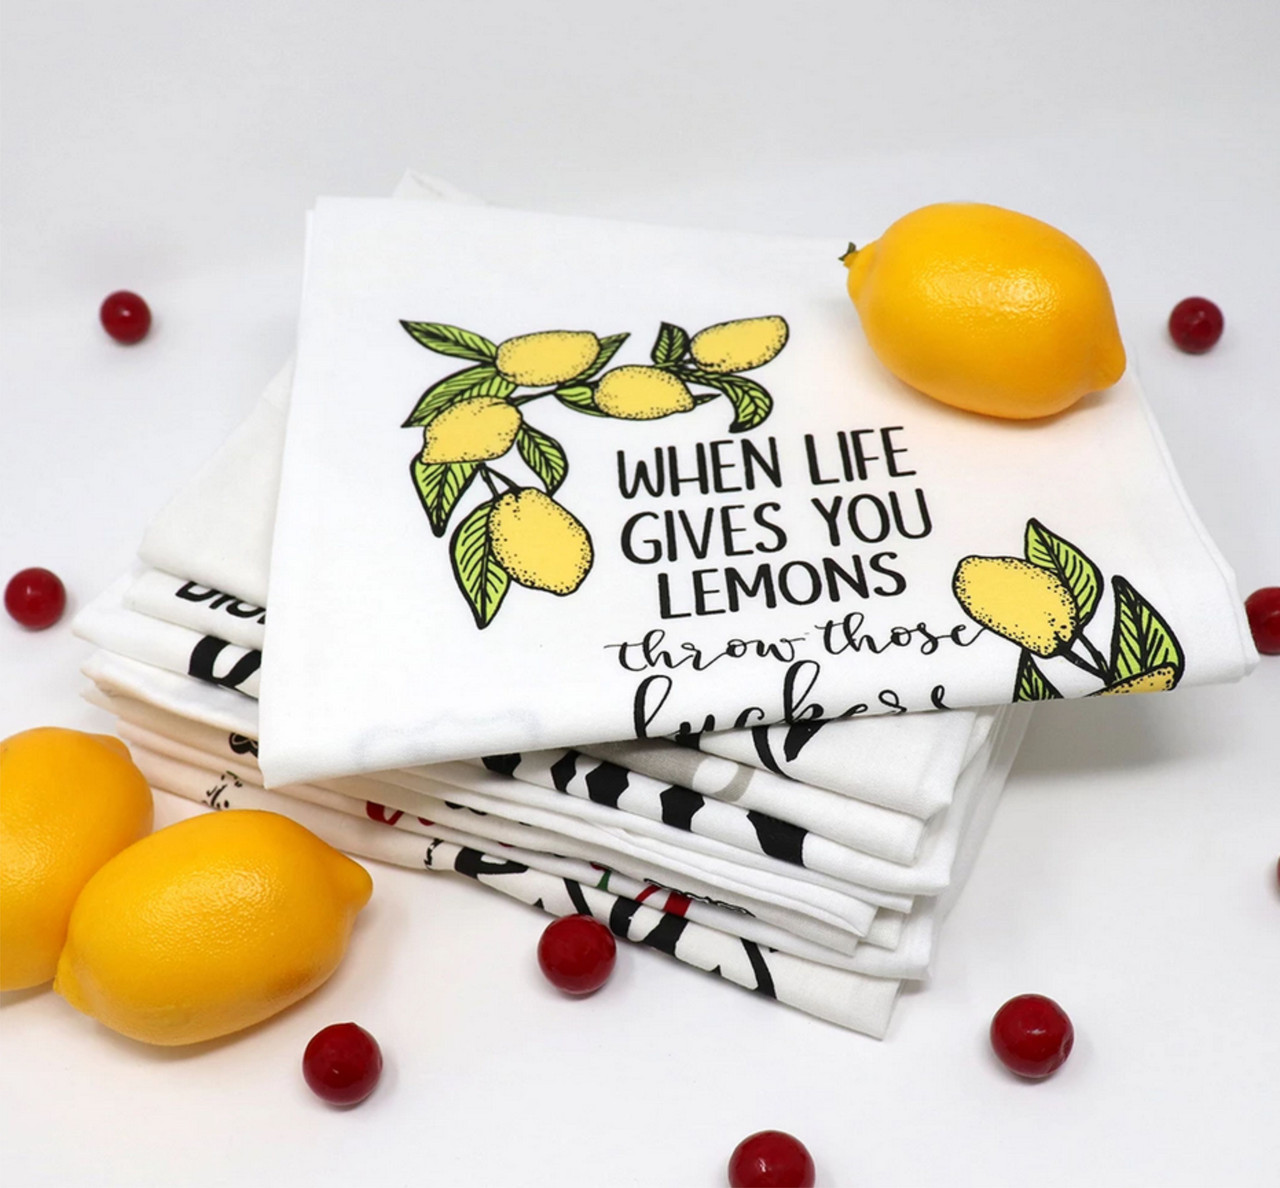 https://cdn11.bigcommerce.com/s-zzpan590xw/images/stencil/1280x1280/products/136/479/when-life-gives-you-lemons-throw-those-fuckers-funny-towel__57144.1648657110.jpg?c=1